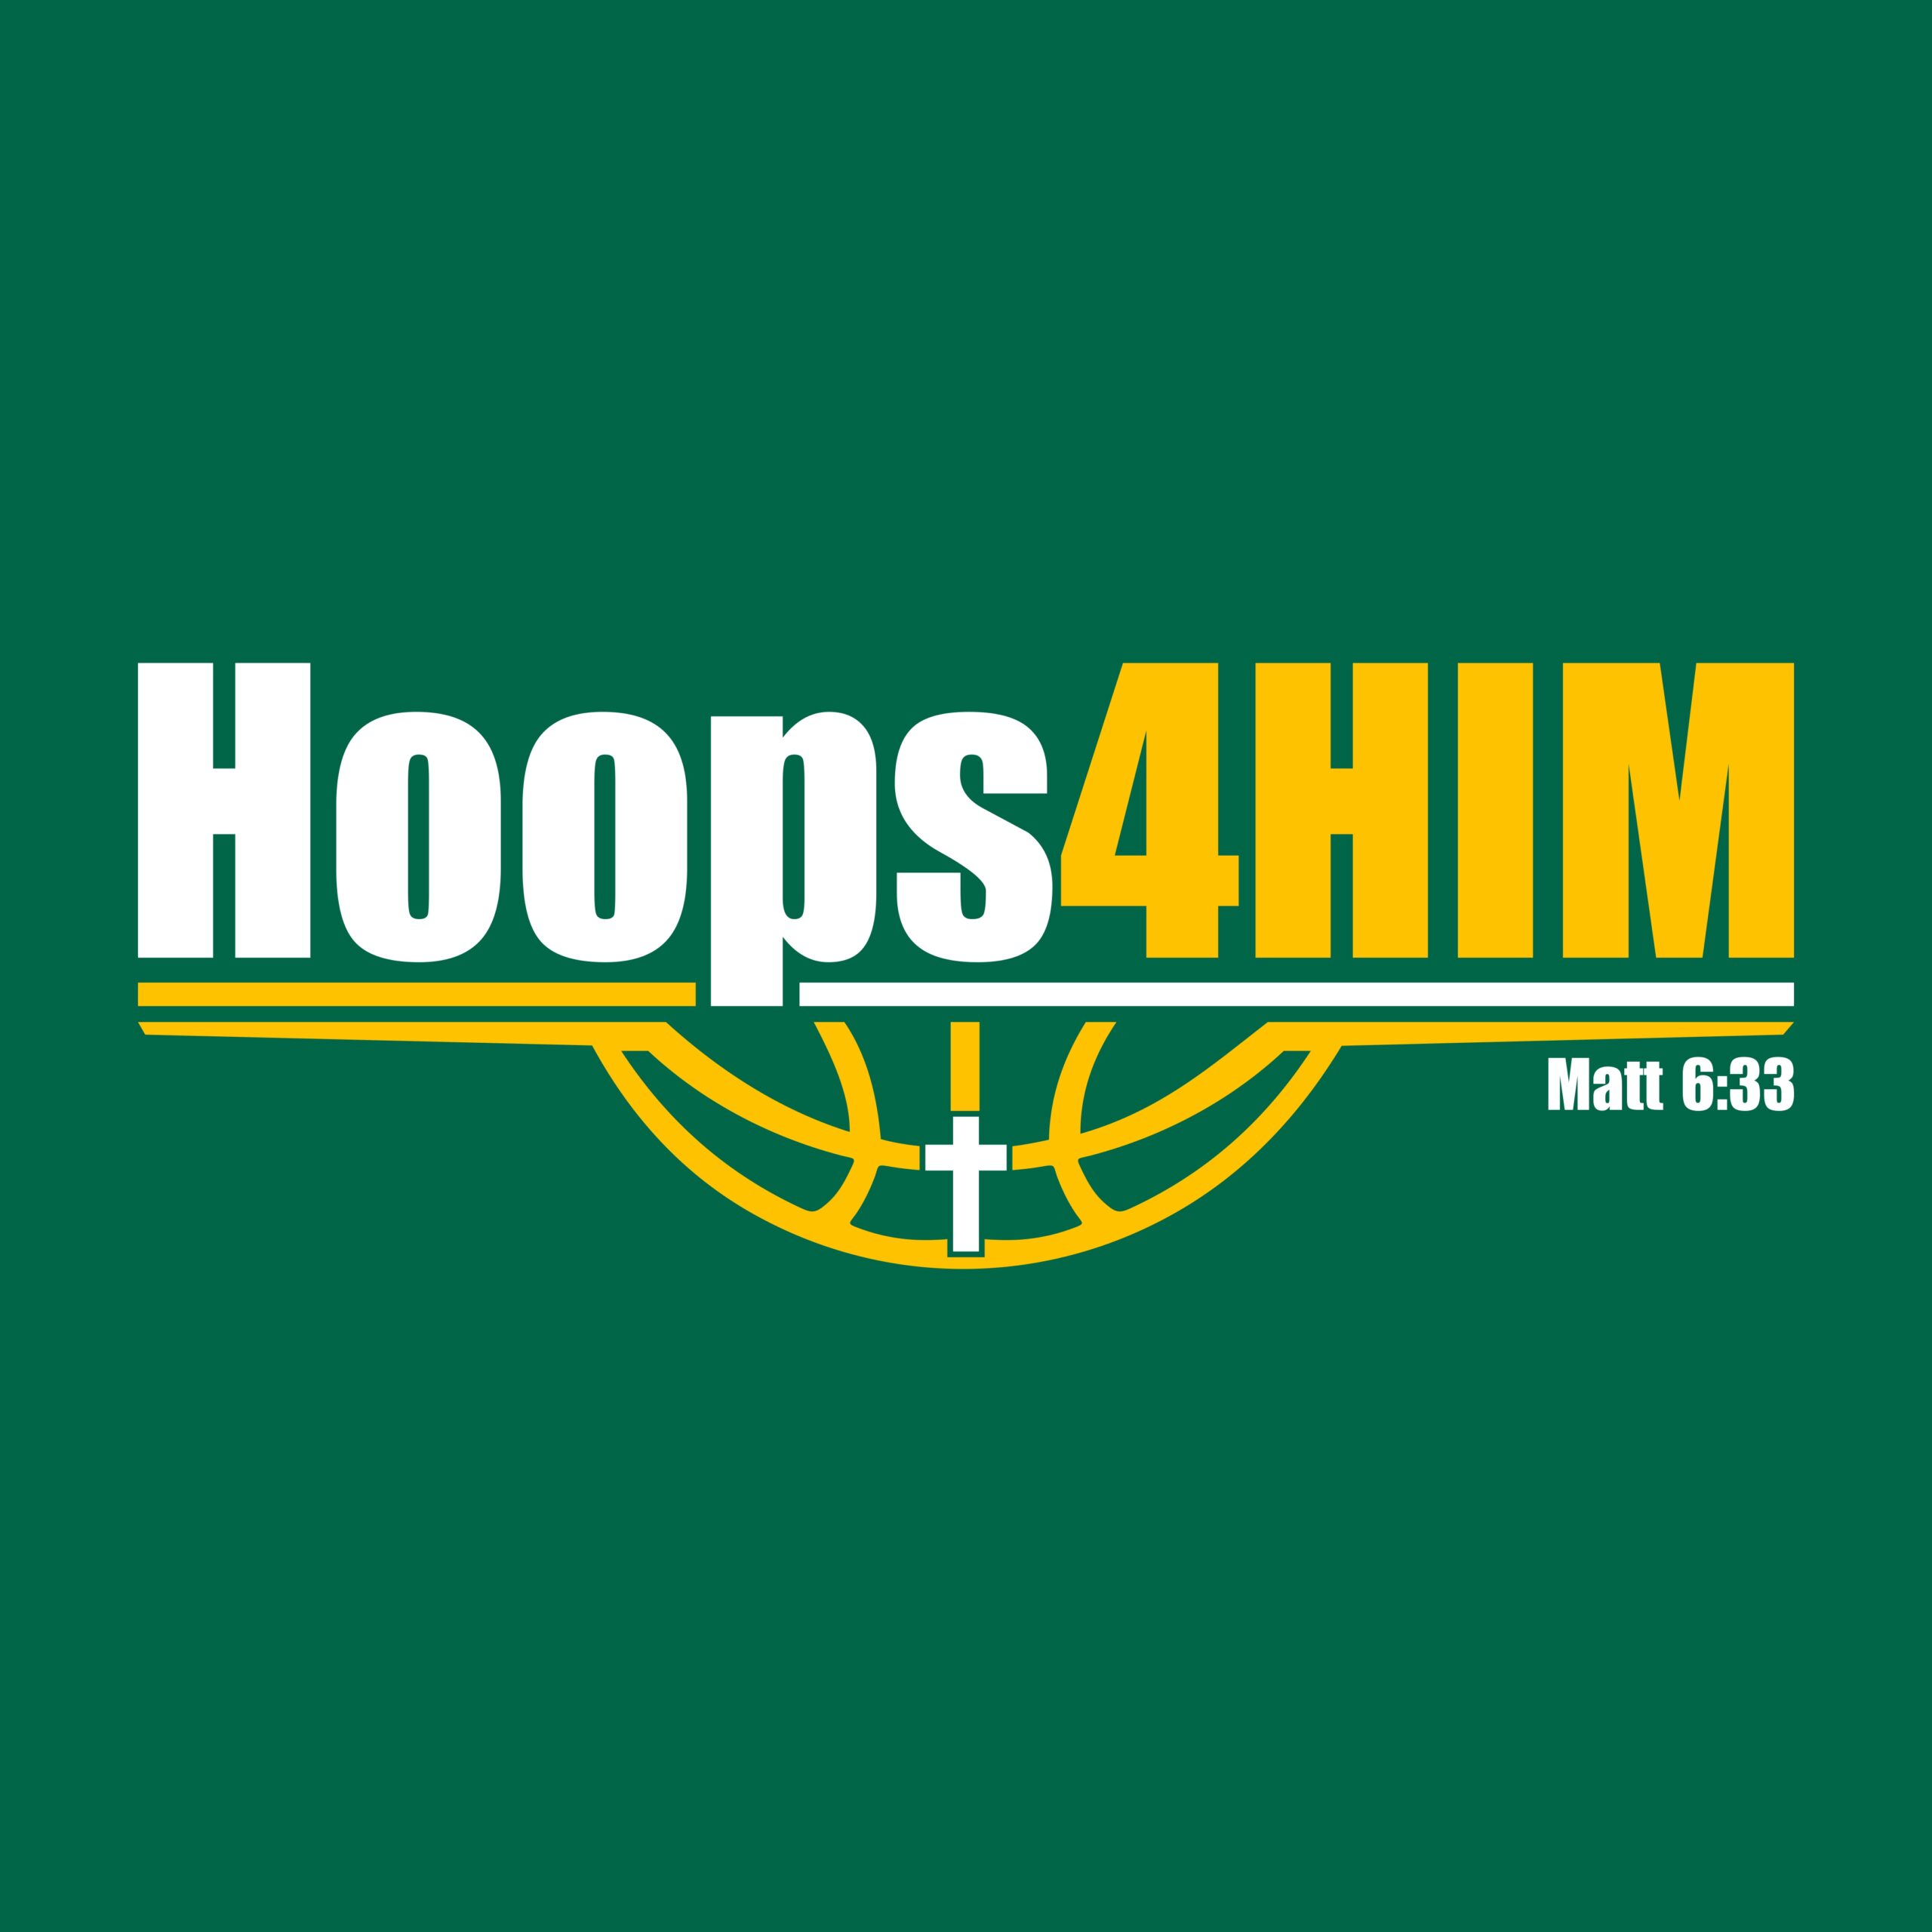 Hoops 4HIM Rectangle Green Updated 9 23